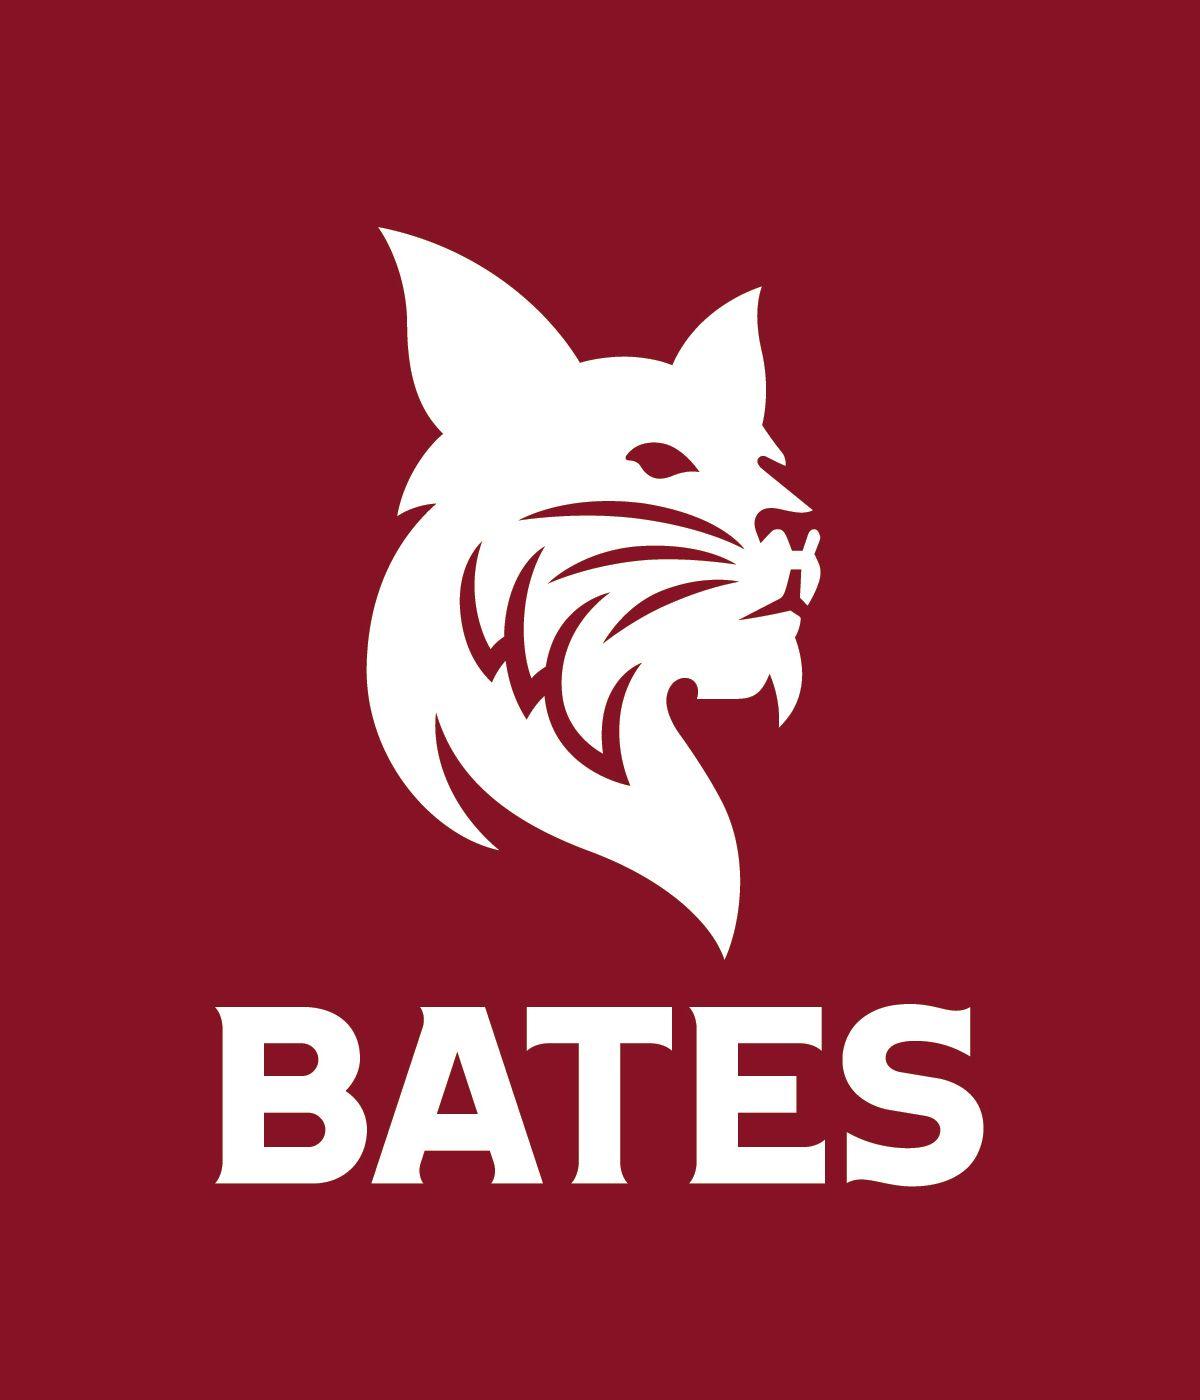 Red and White College Logo - Downloads | Communications | Bates College